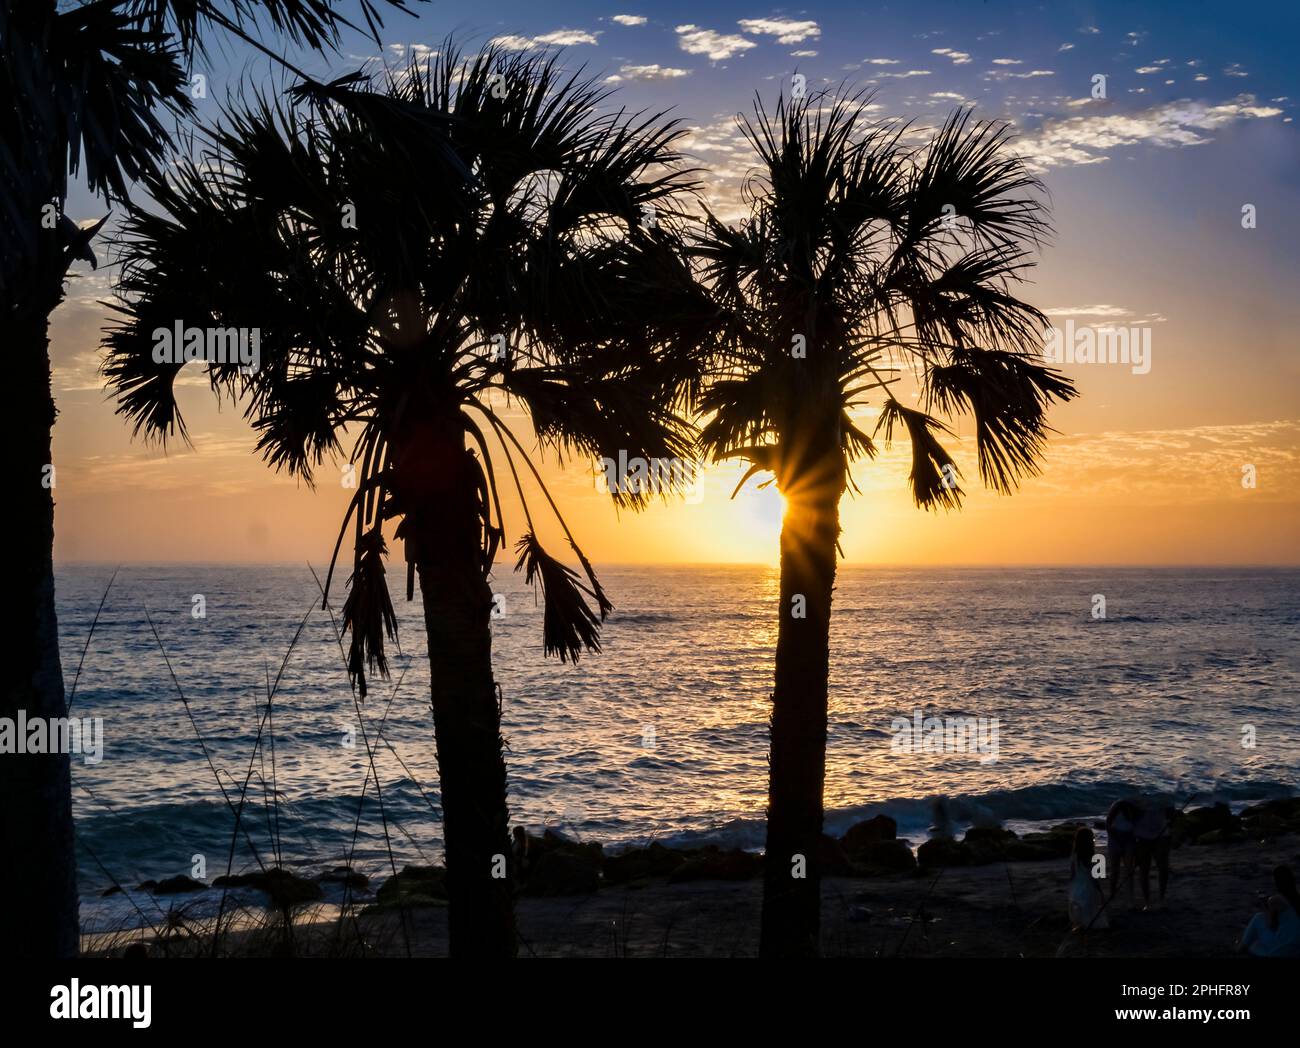 Palm trees silhouetted aganist an orange and blue sunset sky  over the Gulf of Mexico at Caspersen Beach in Venice Florida USA Stock Photo